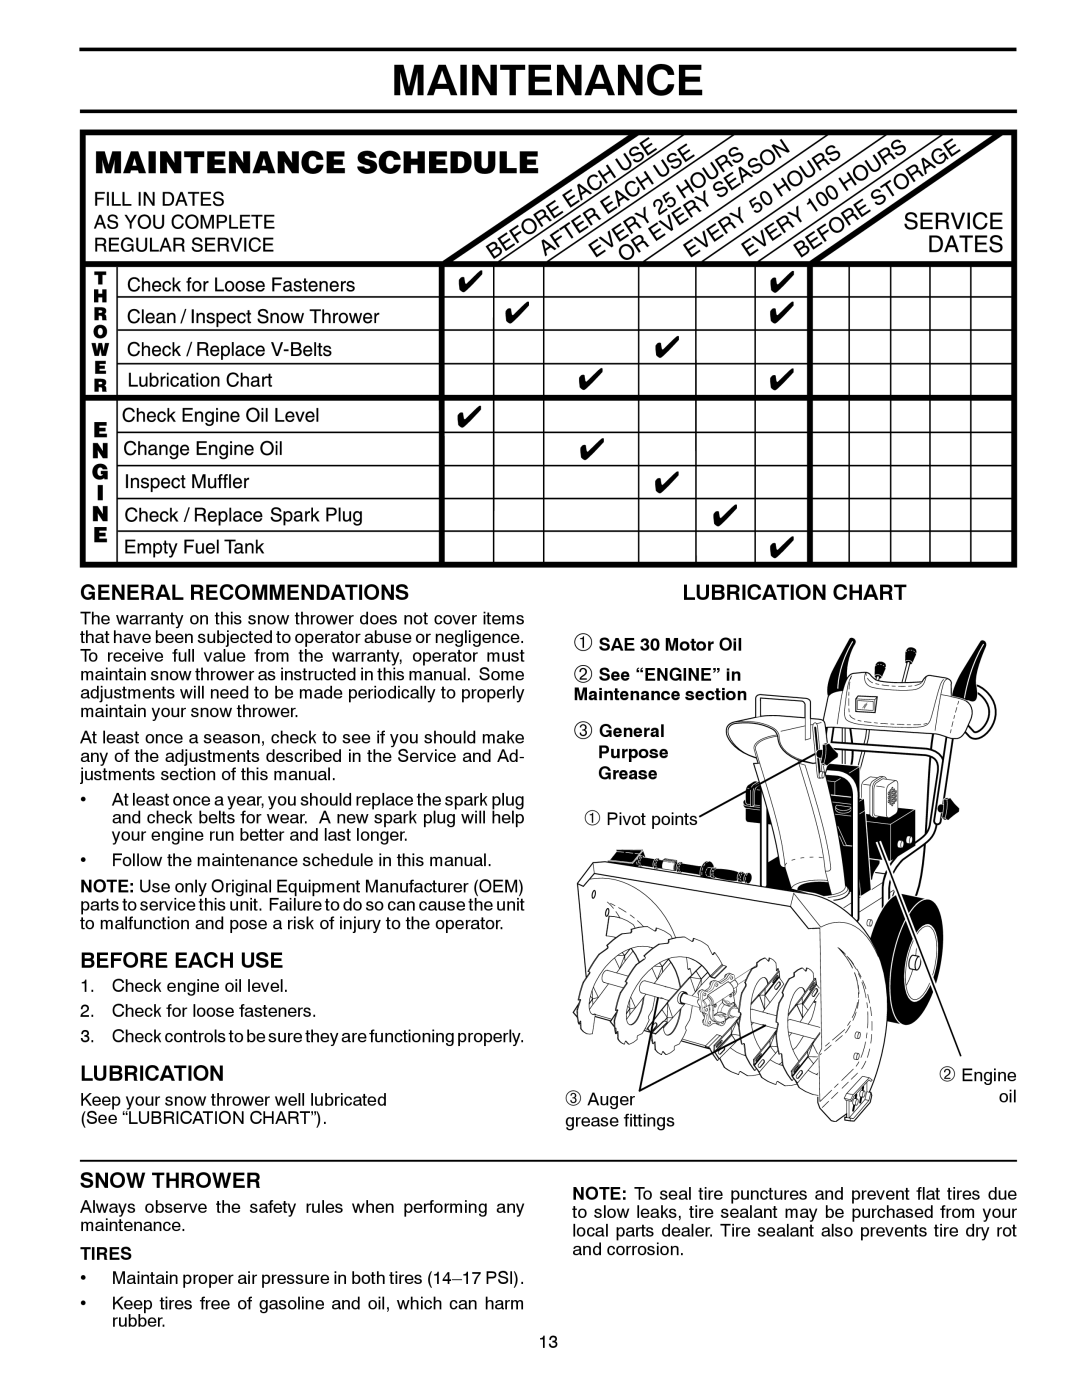 Husqvarna 96193006400 Maintenance, General Recommendations, Before Each Use, Snow Thrower, Lubrication Chart, Tires 